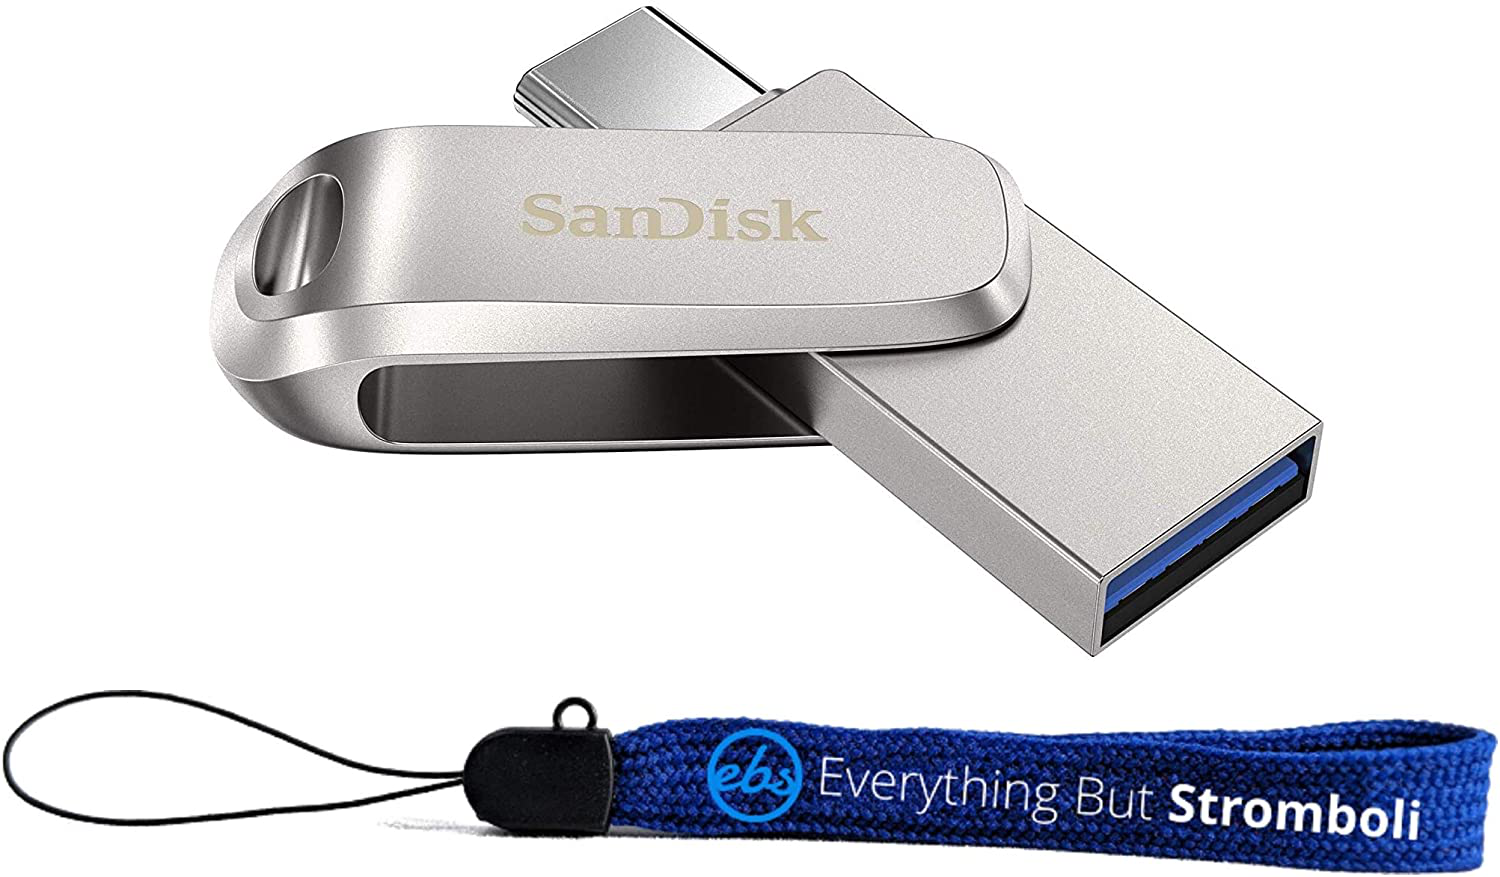 Sandisk Ultra Dual Drive Luxe USB Type-C 128GB Flash Drive for Smartphones, Tablets, and Computers - High Speed USB 3.1 Pen Drive (SDDDC4-128G-G46) Bundle with (1) Everything but Stromboli Lanyard